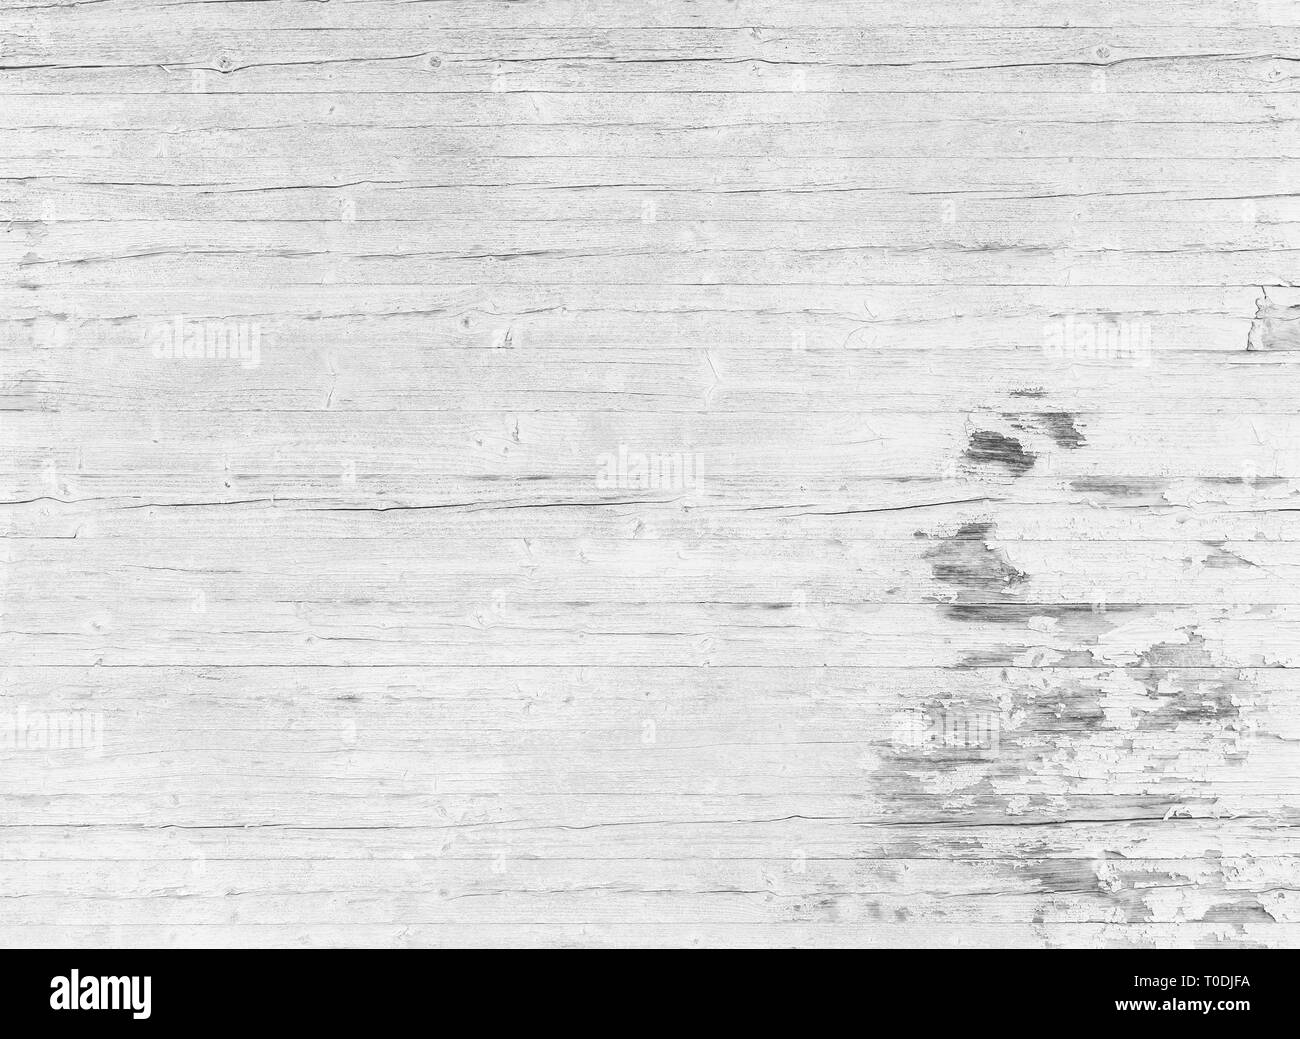 High resolution full frame background of a weathered wooden wall or wood paneling in black and white, paint peeling off. Stock Photo